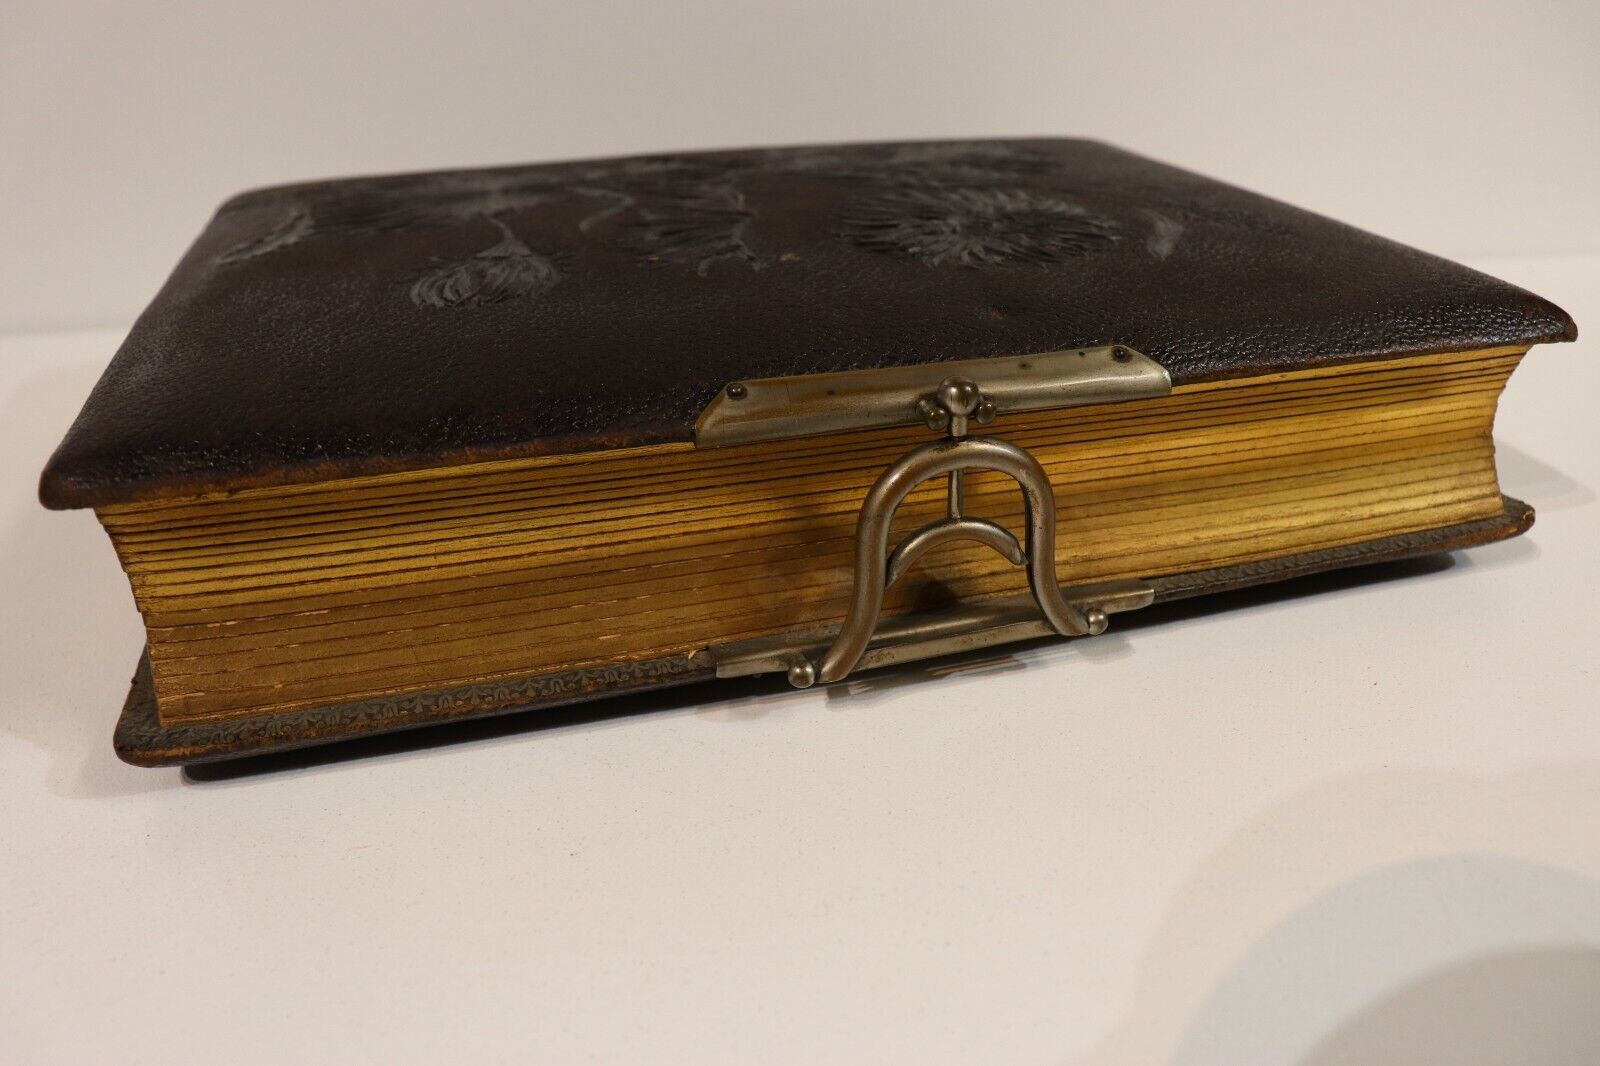 Antique Victorian Photo Album - c1895 - Leather With Silver Clasp & Floral